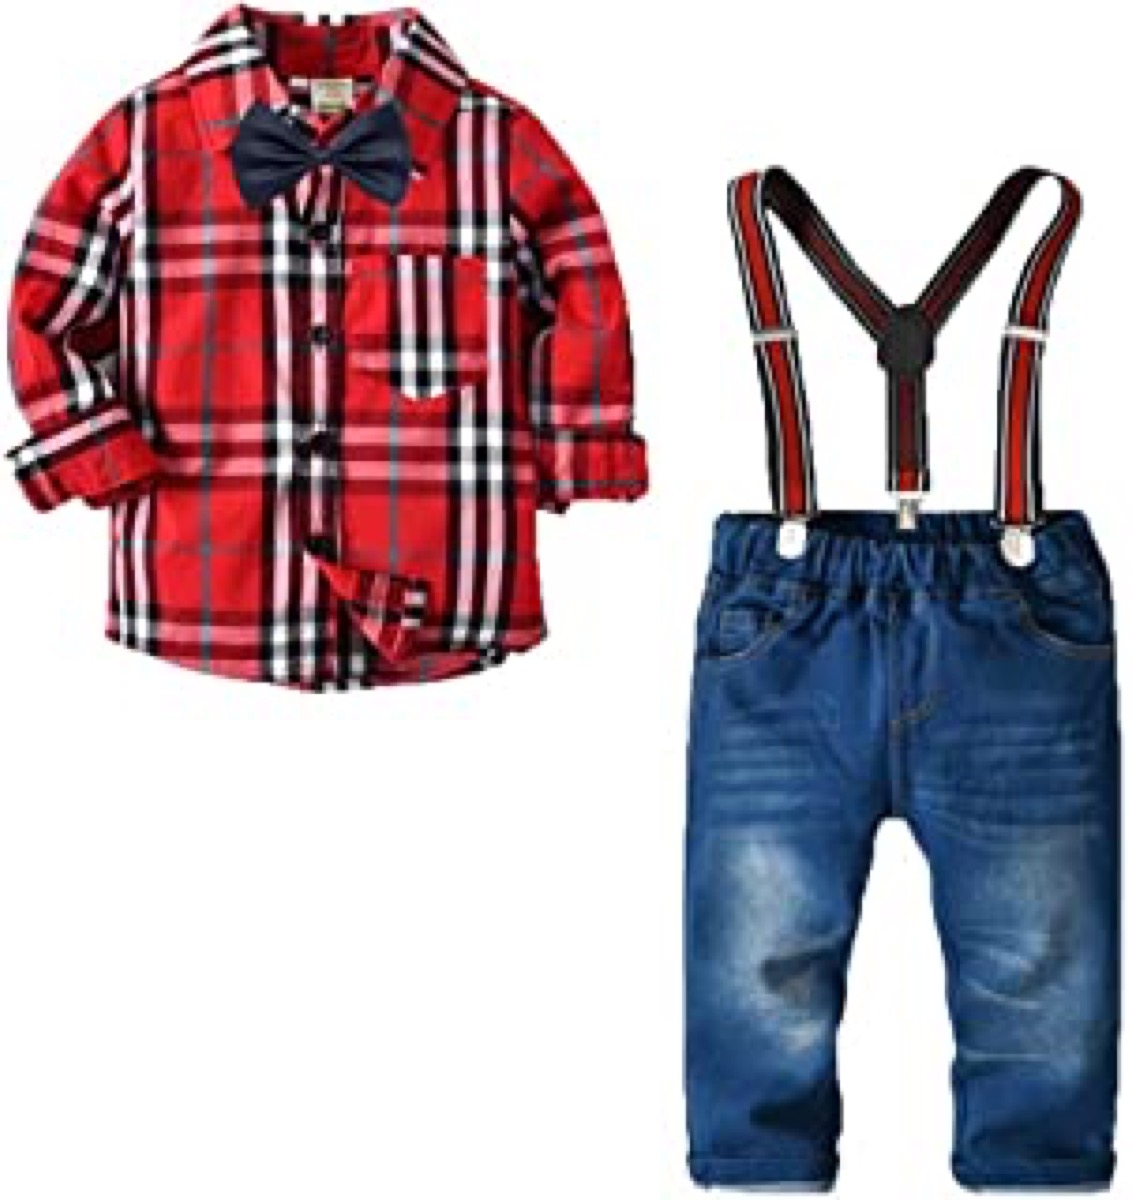 red plaid shirt with bow tie and jeans with suspenders